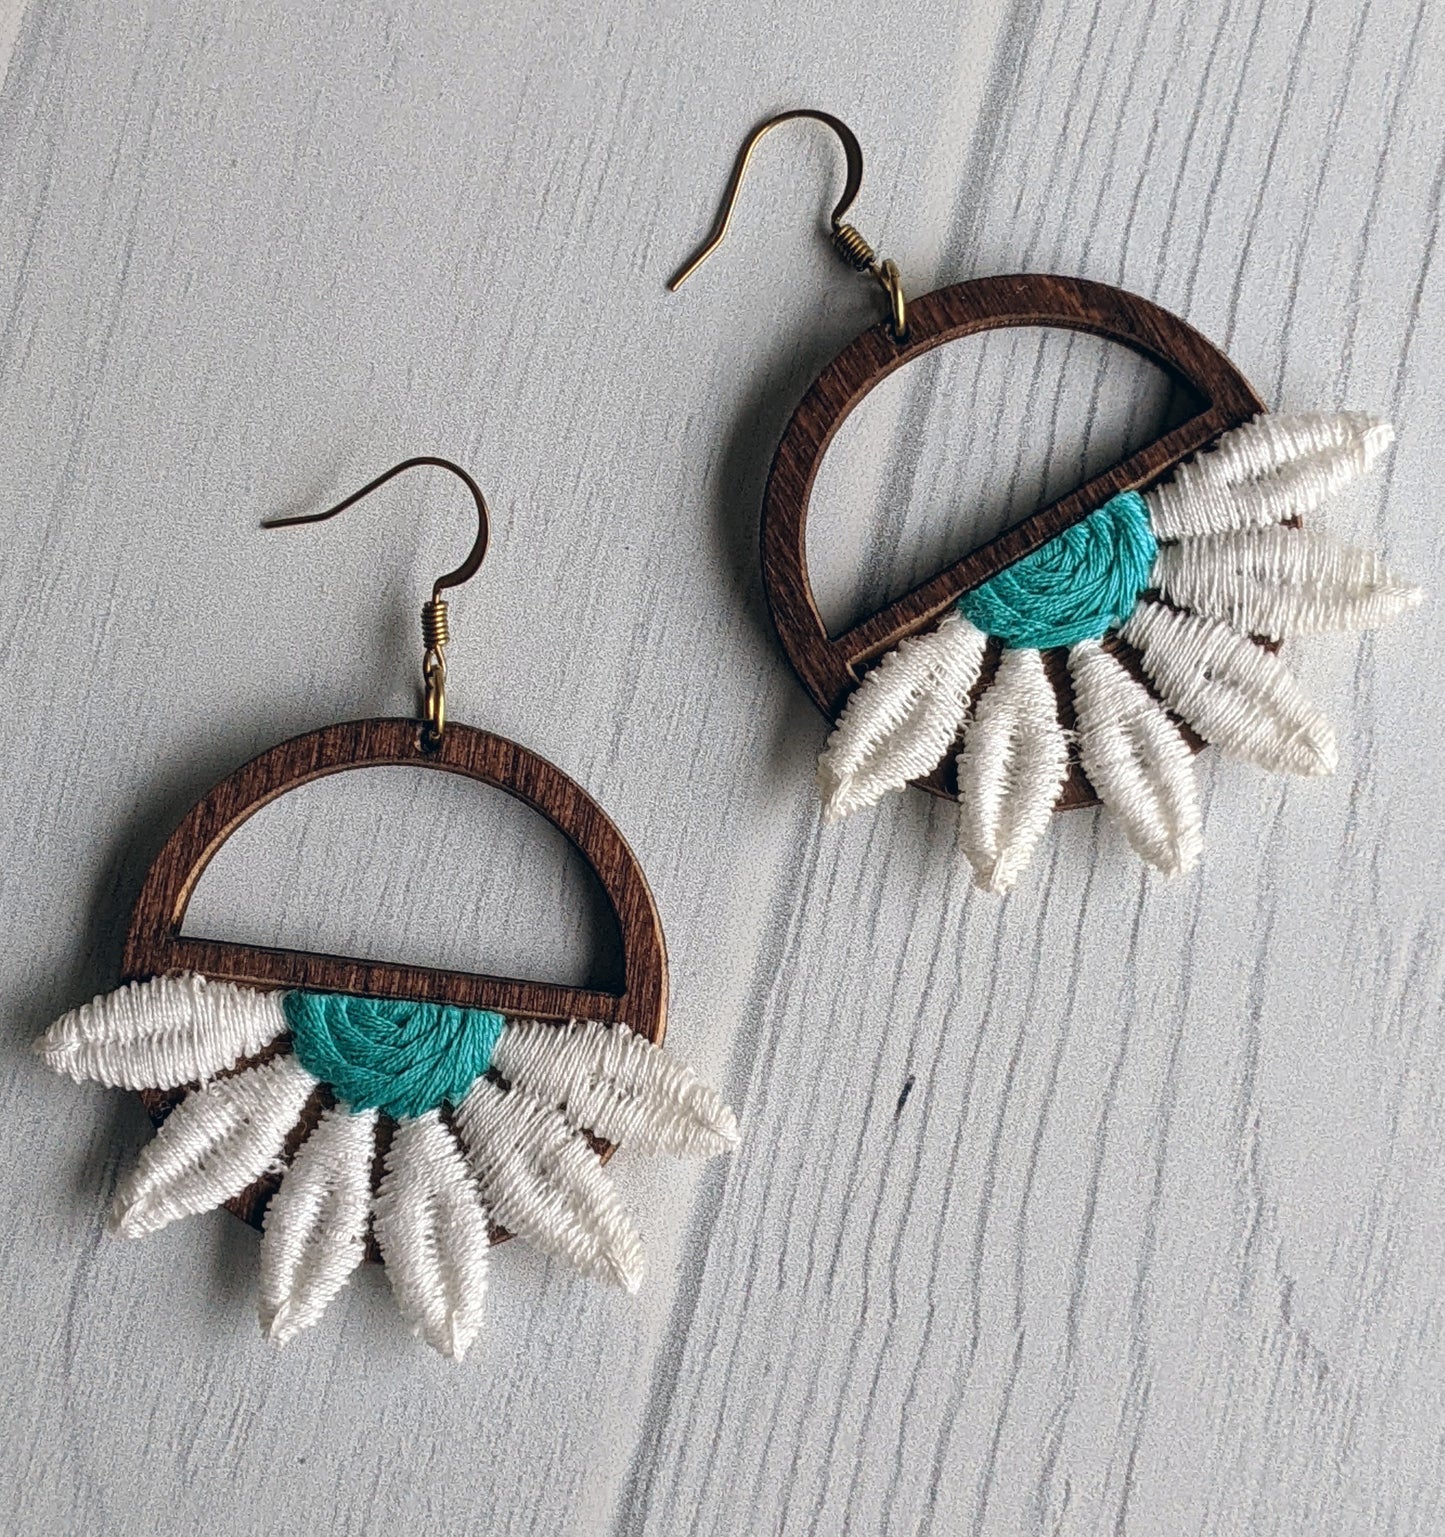 Half Daisy Earrings Made With Vintage 90s Fabric Flowers And Wood Hoops - Teal Green And White